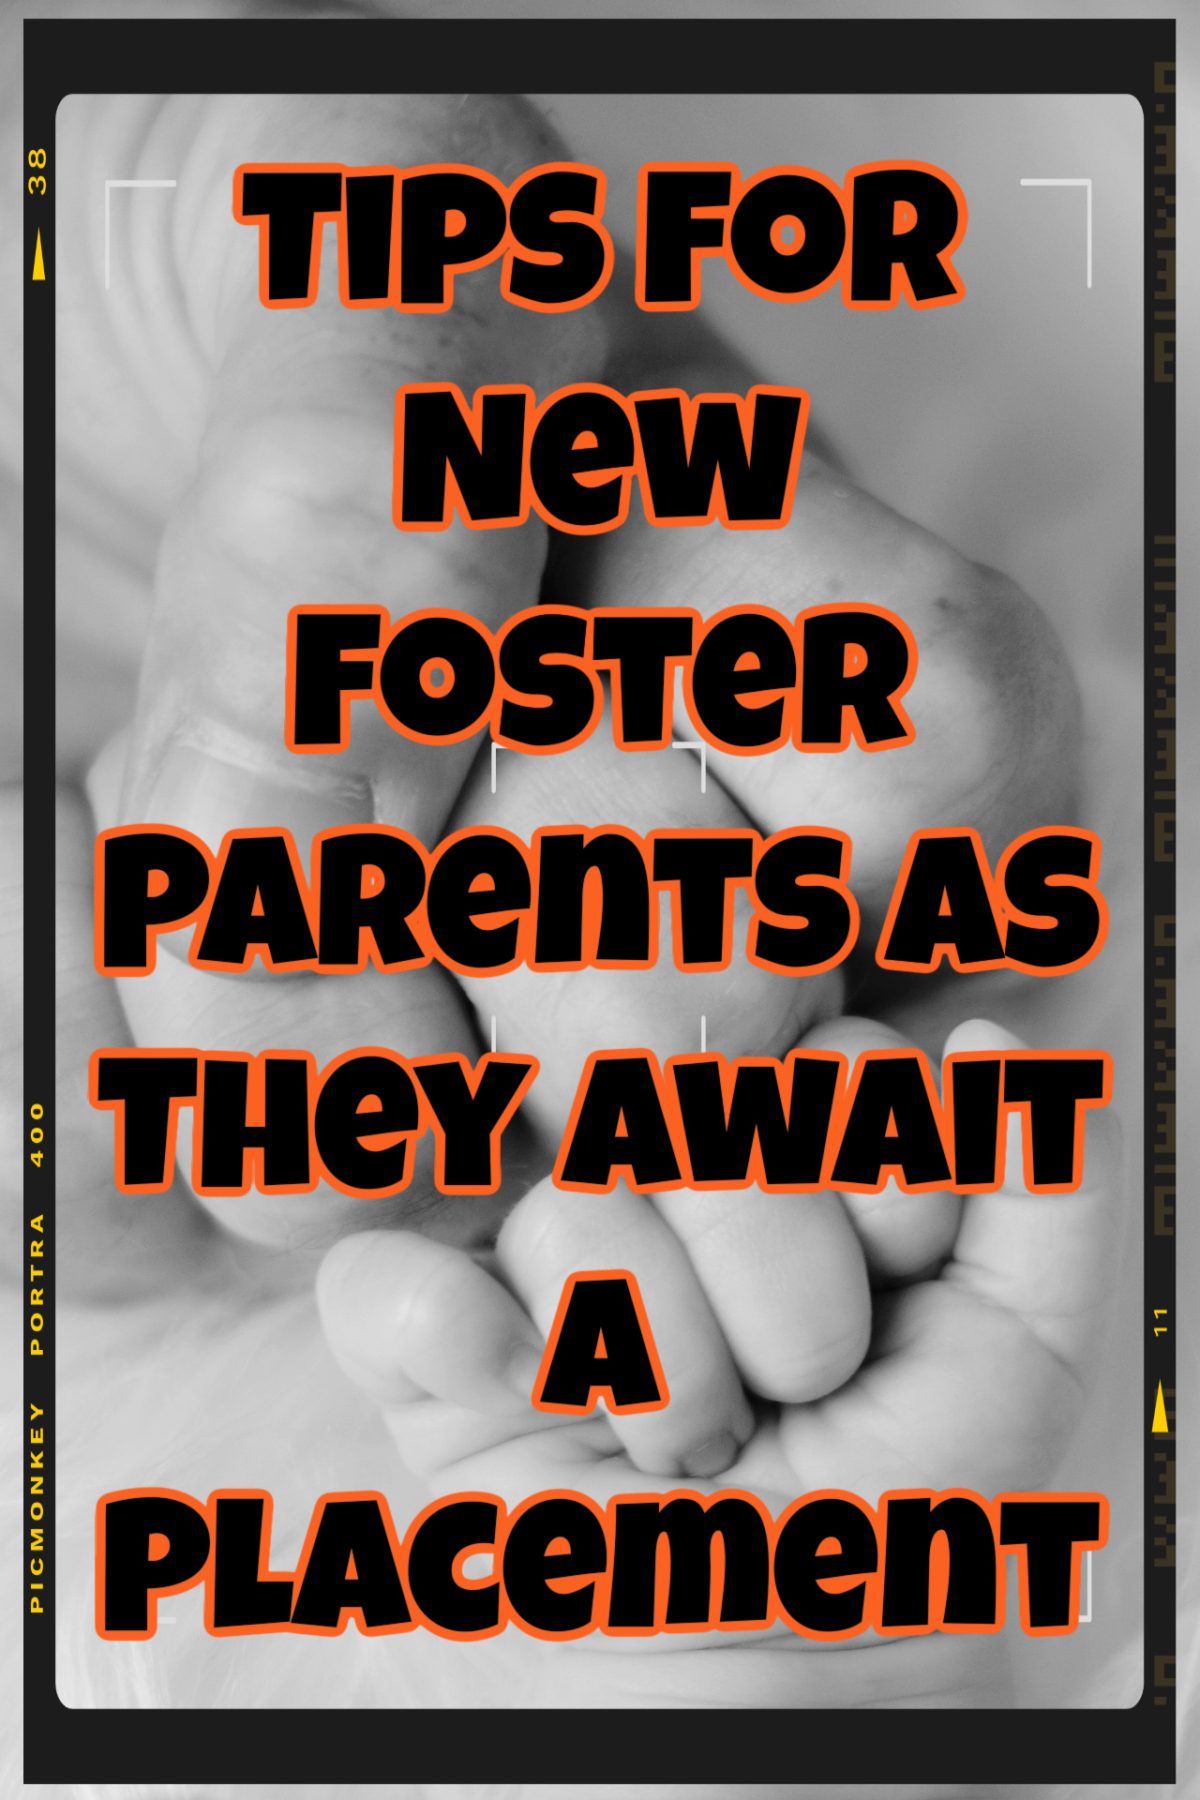 Tips For New Foster Parents As They Await A Placement.